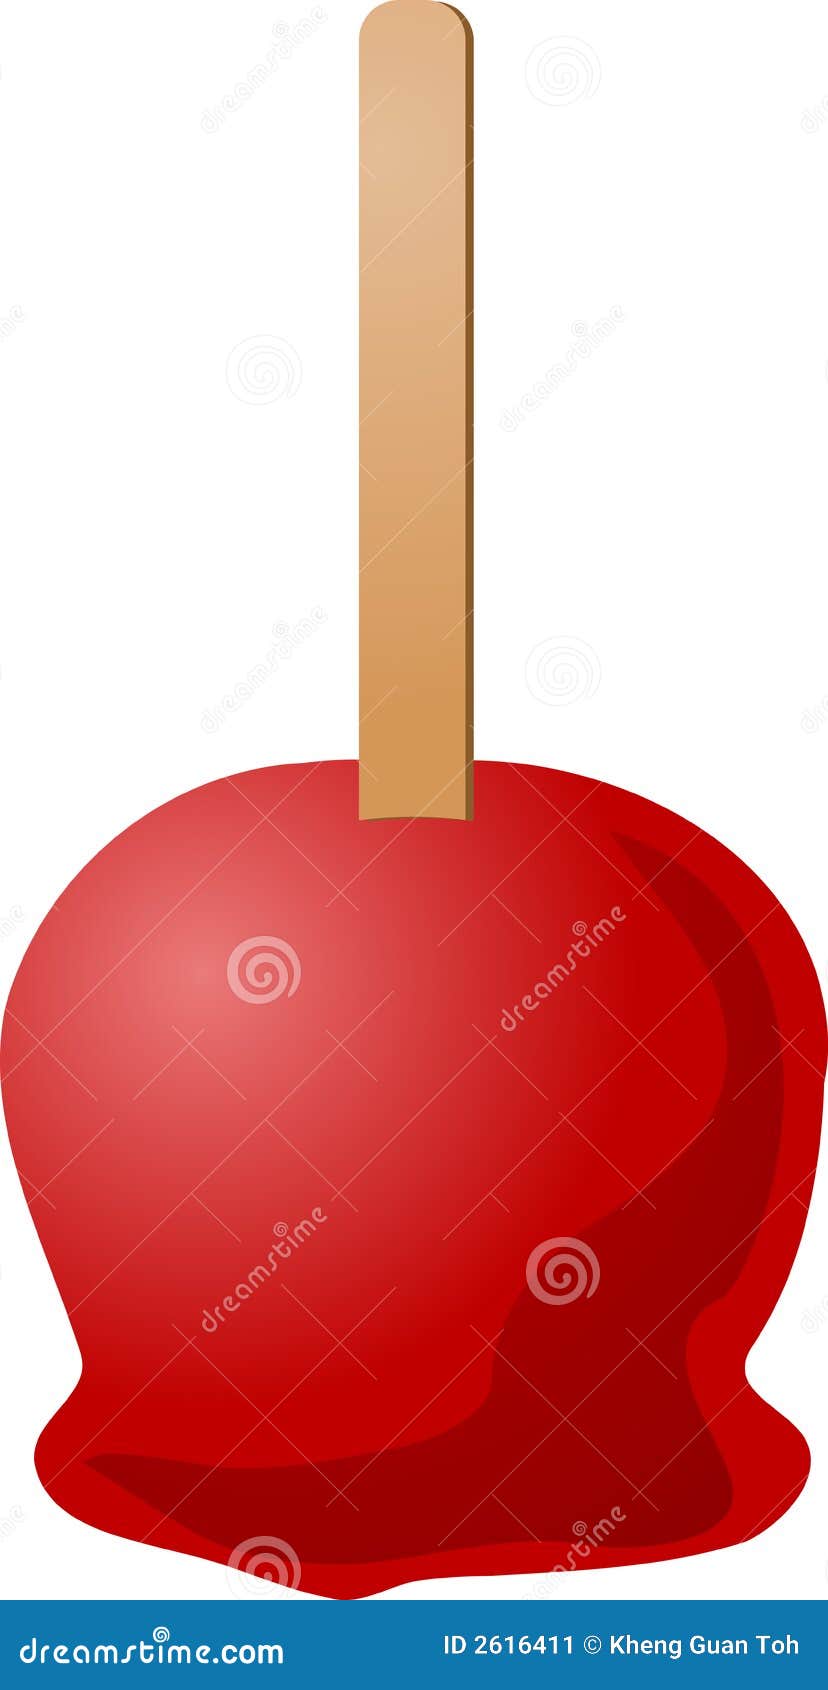 candy apple clipart - photo #25